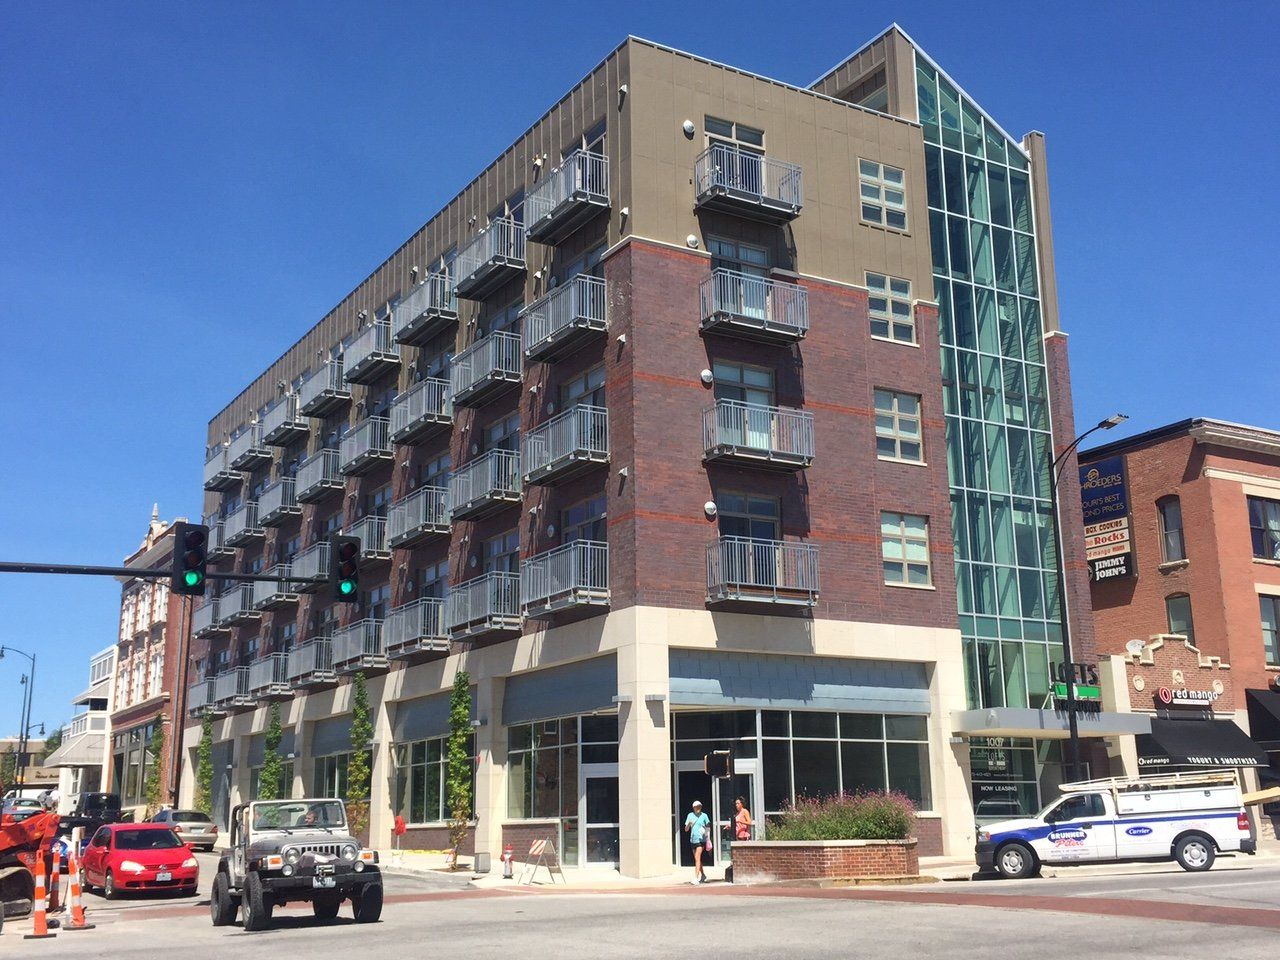 The Lofts on Broadway Are One of Several Columbia, MO Apartment Locations